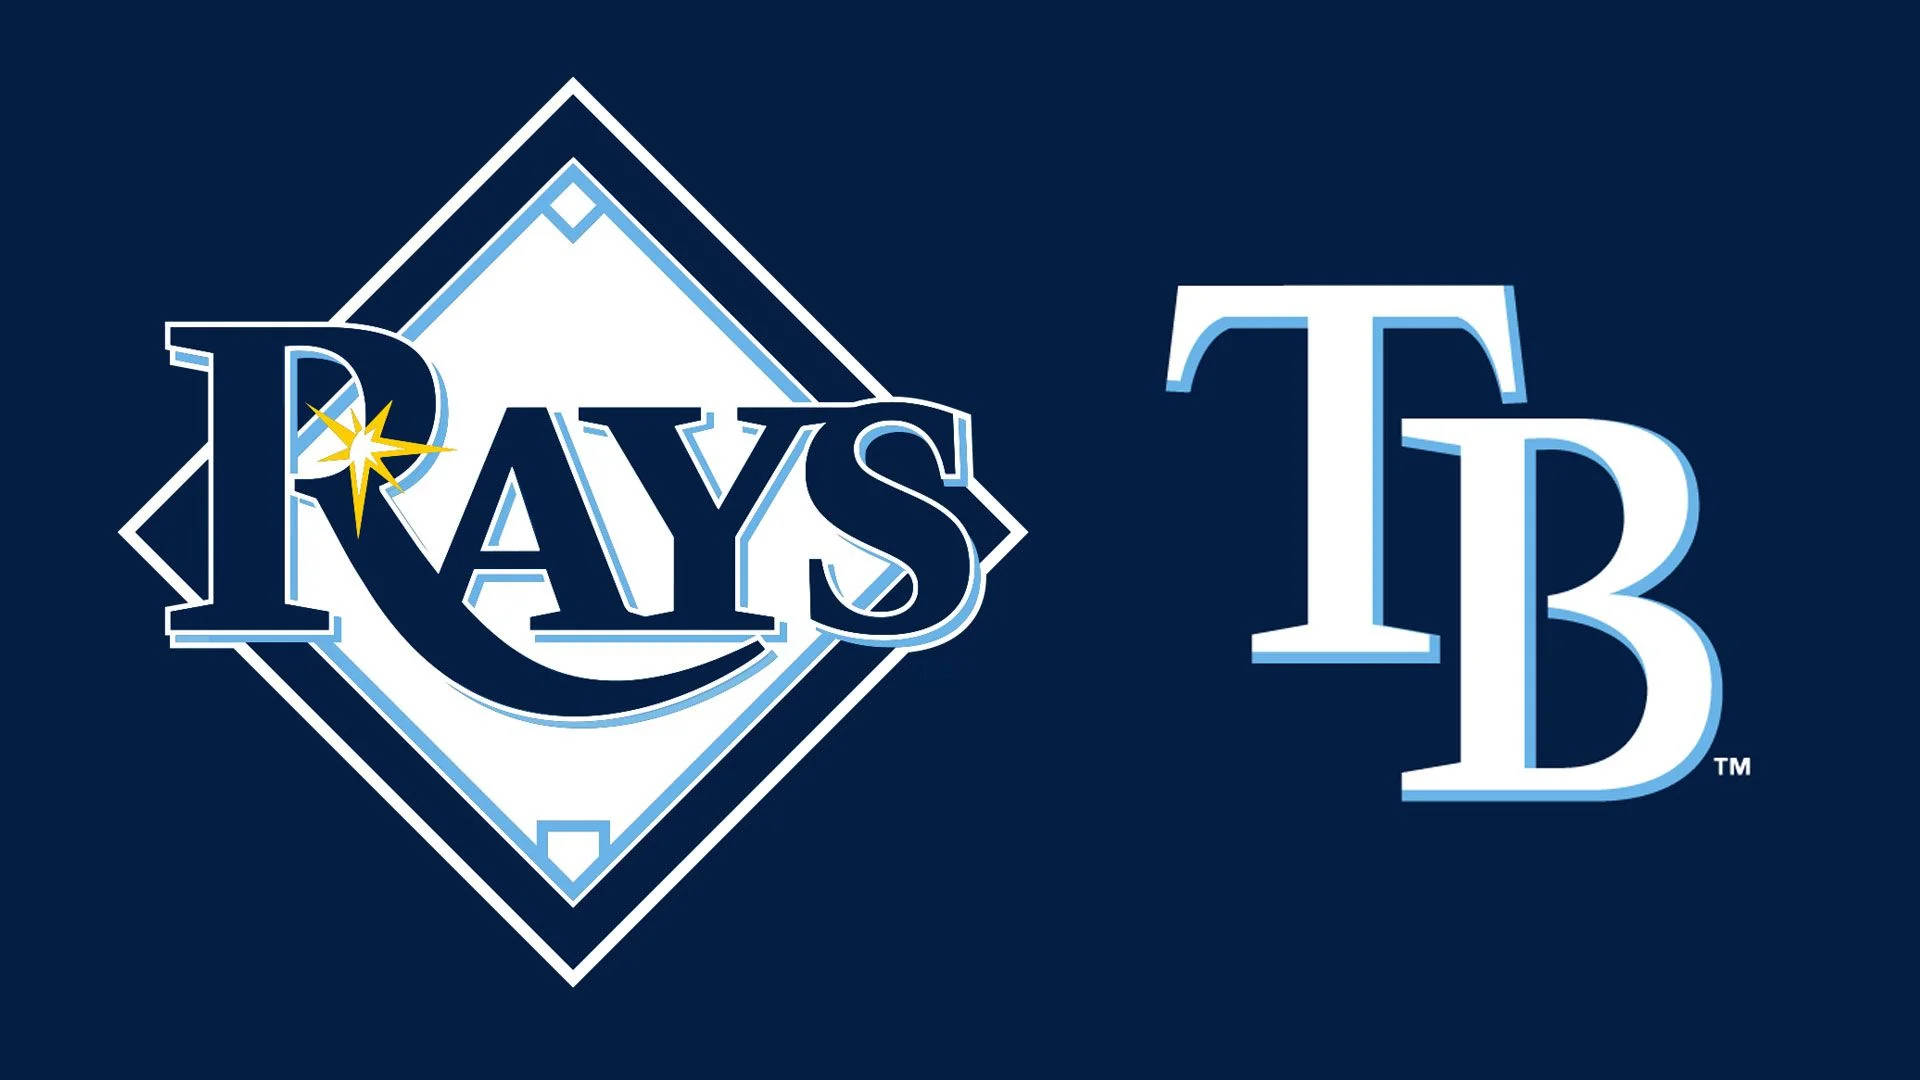 Tampa Bay Rays Logos In Blue